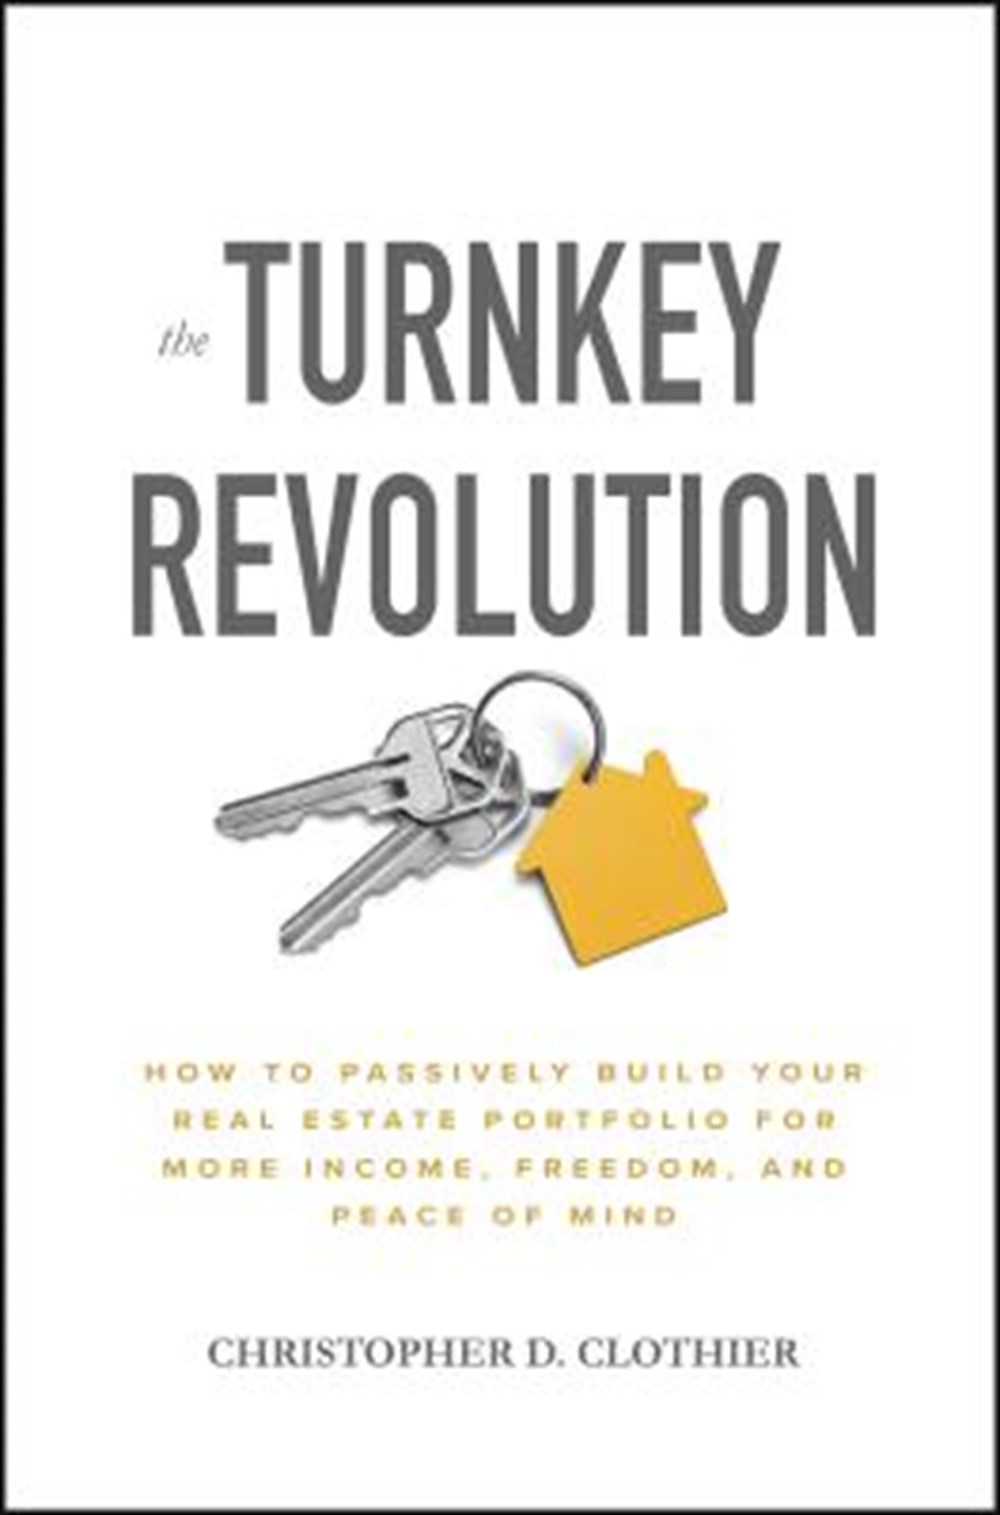 Turnkey Revolution How to Passively Build Your Real Estate Portfolio for More Income, Freedom, and P